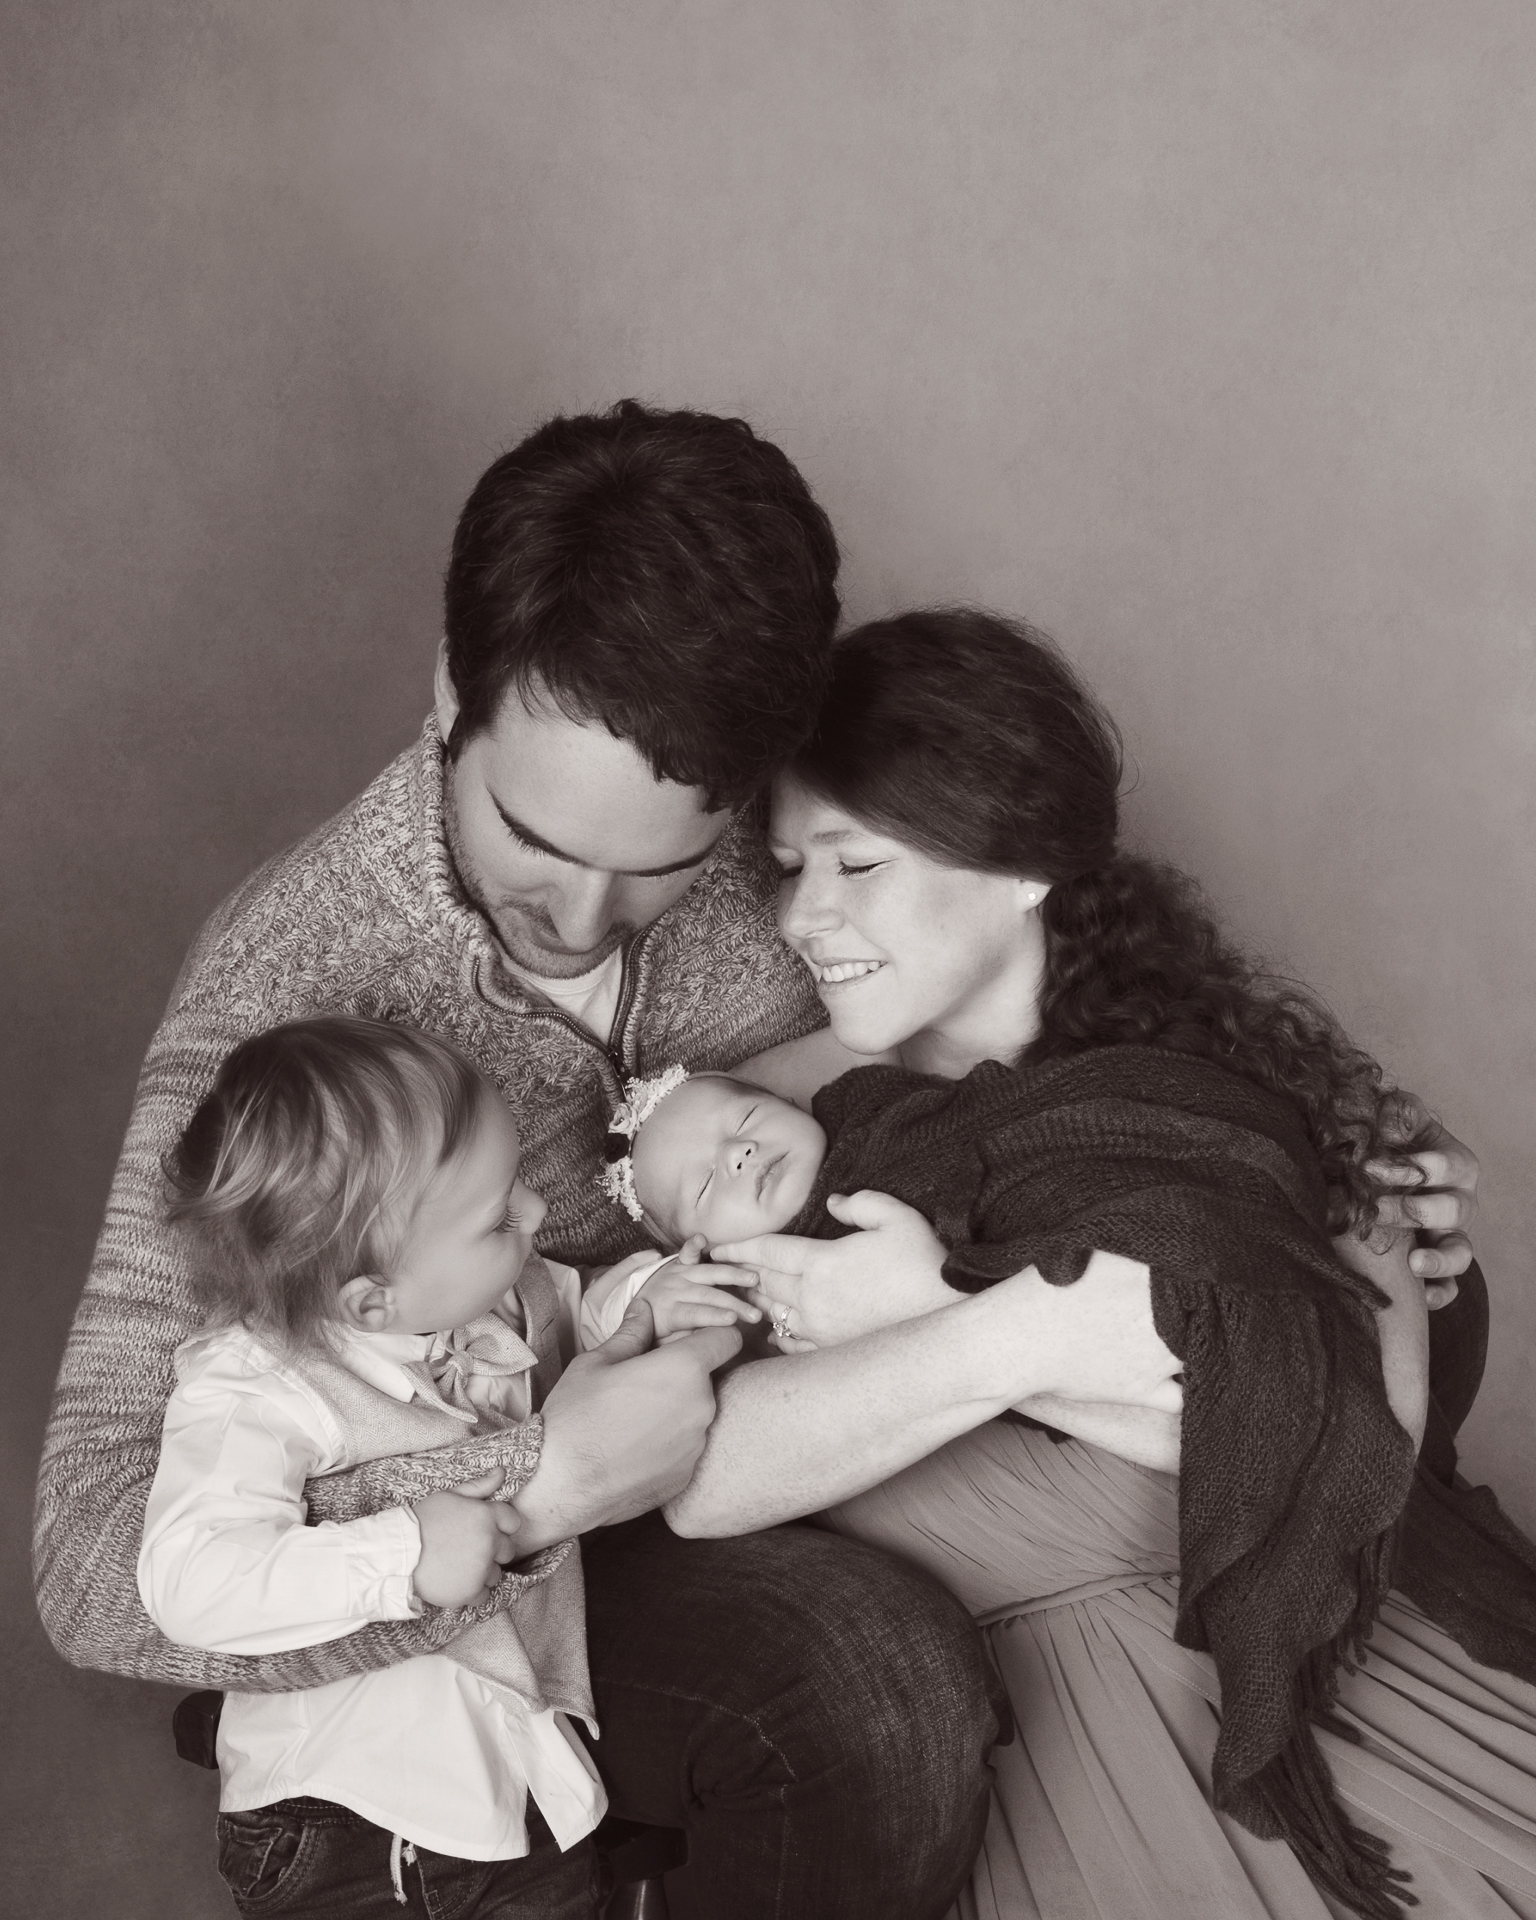 Family of 4 posing indoors. Black and white image. Dad, toddler boy, mom and newborn baby girl.